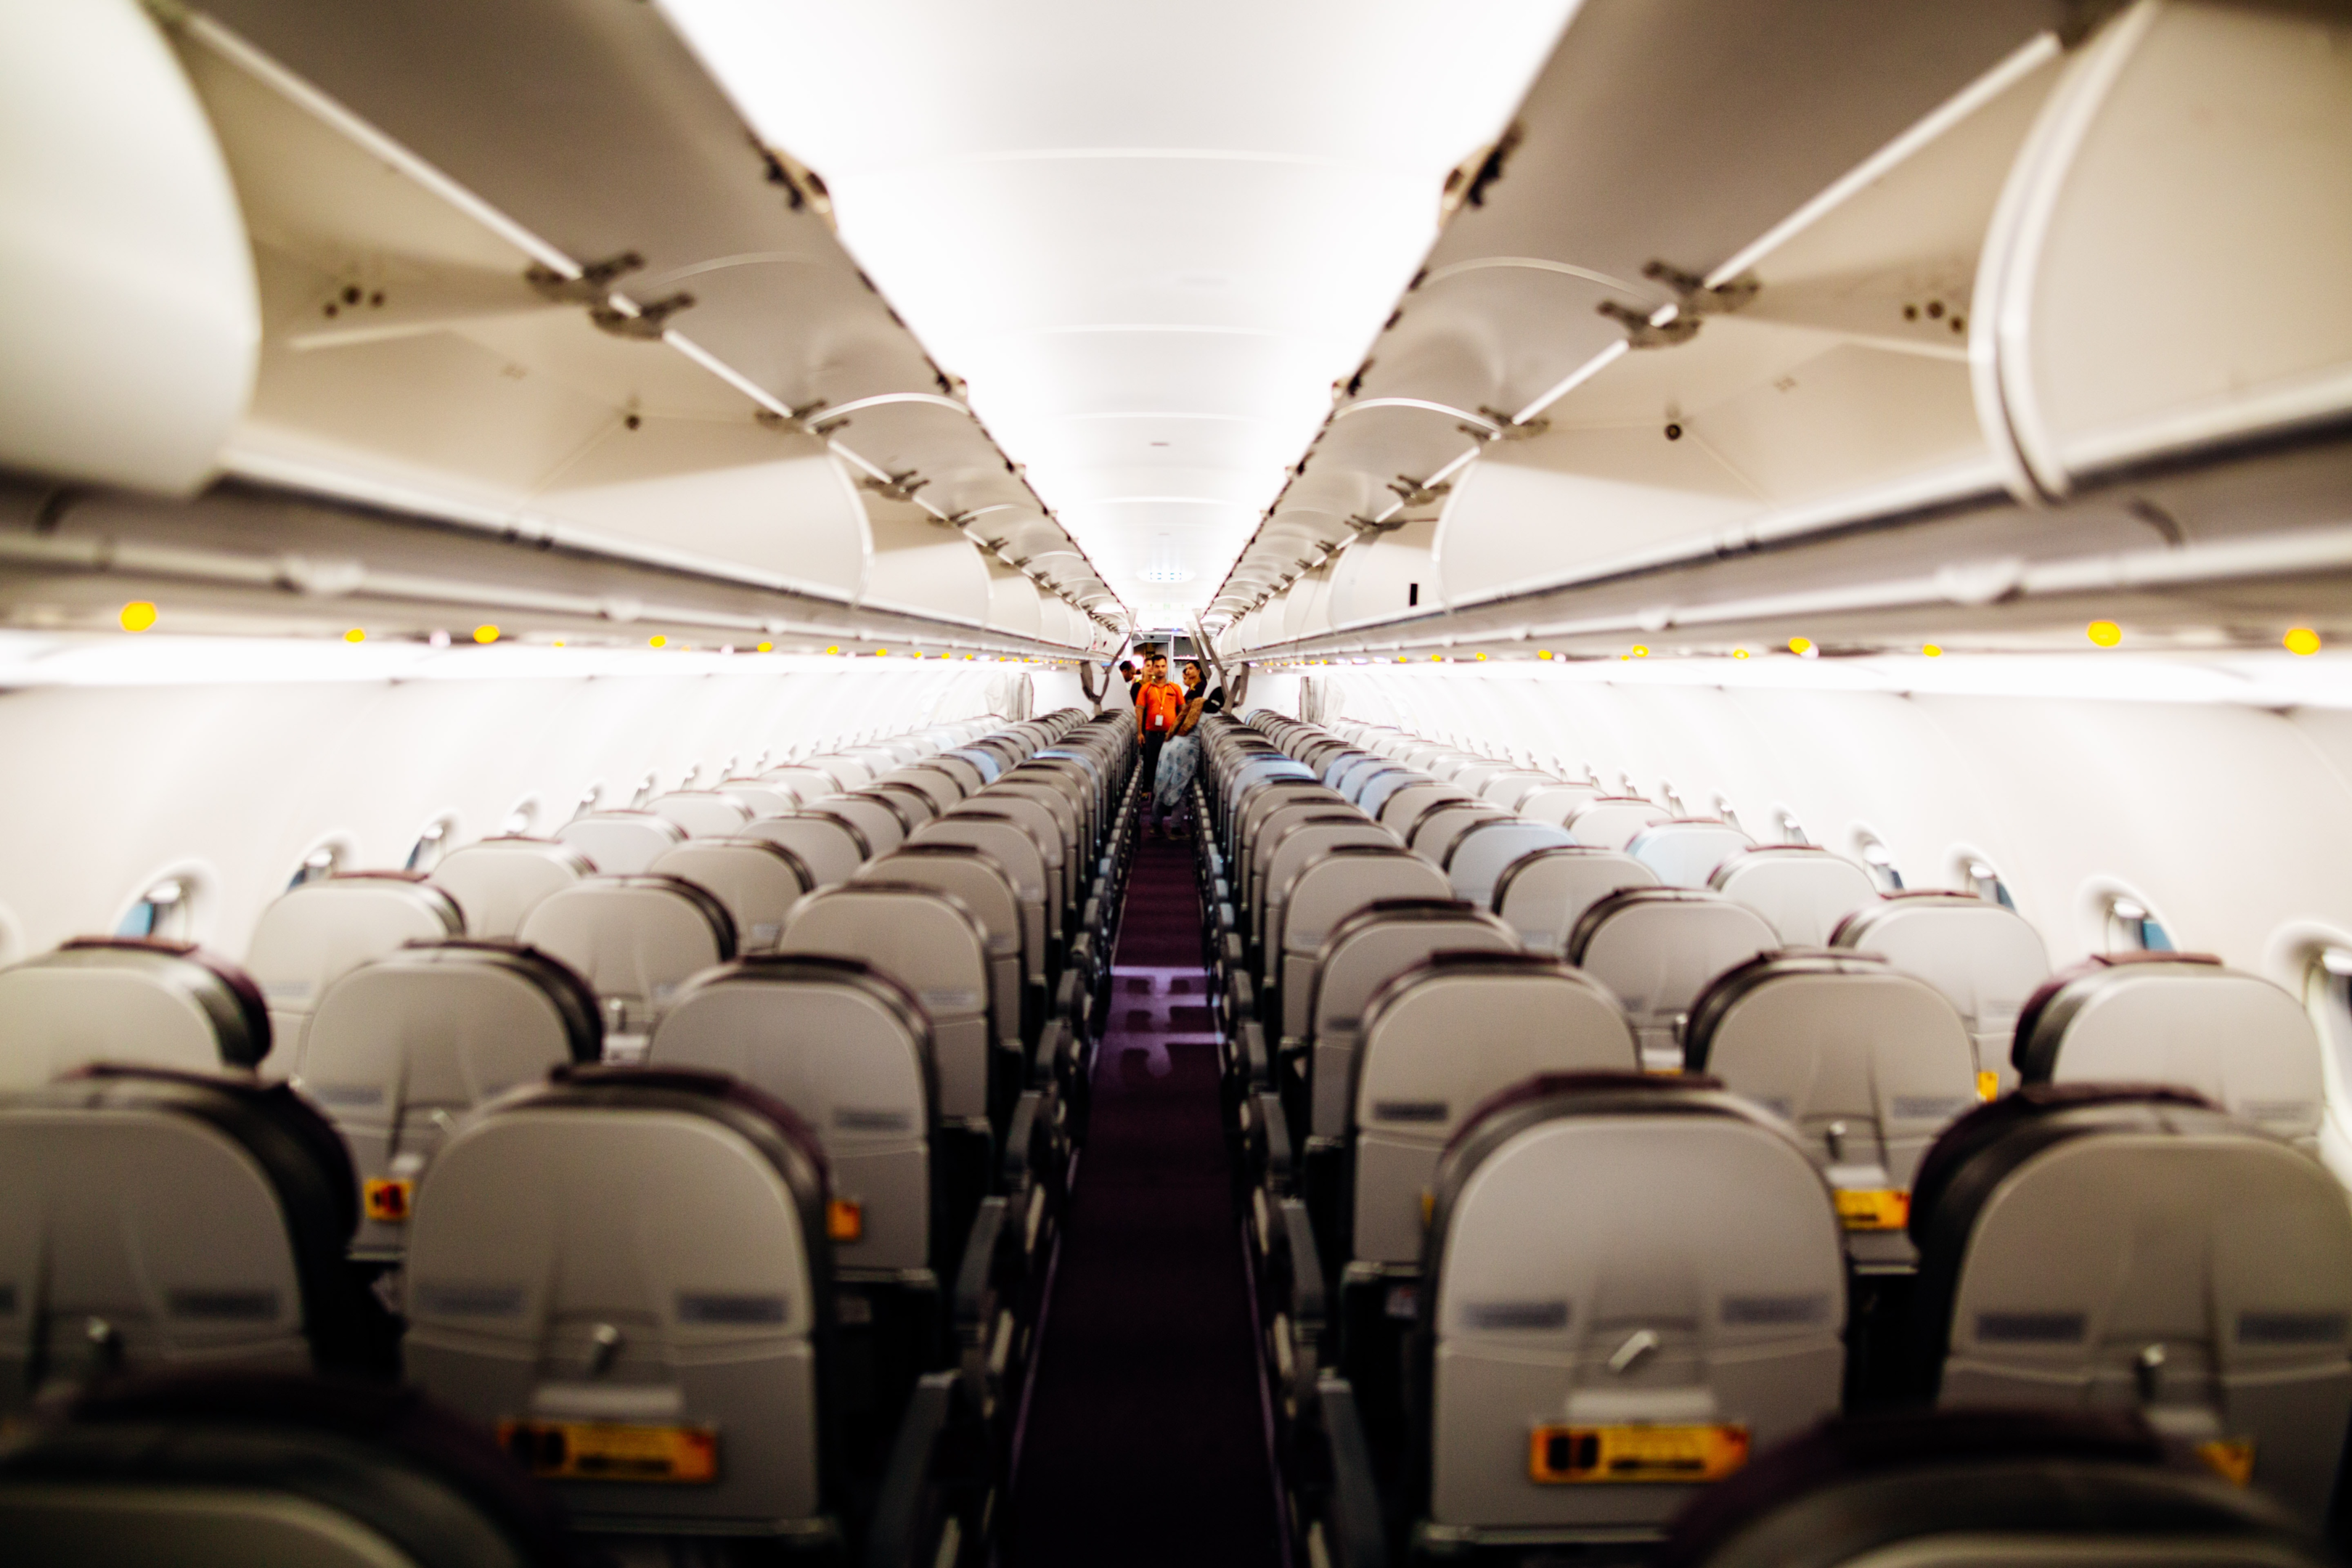 Rows of empty airplane seats on board an aircraft.